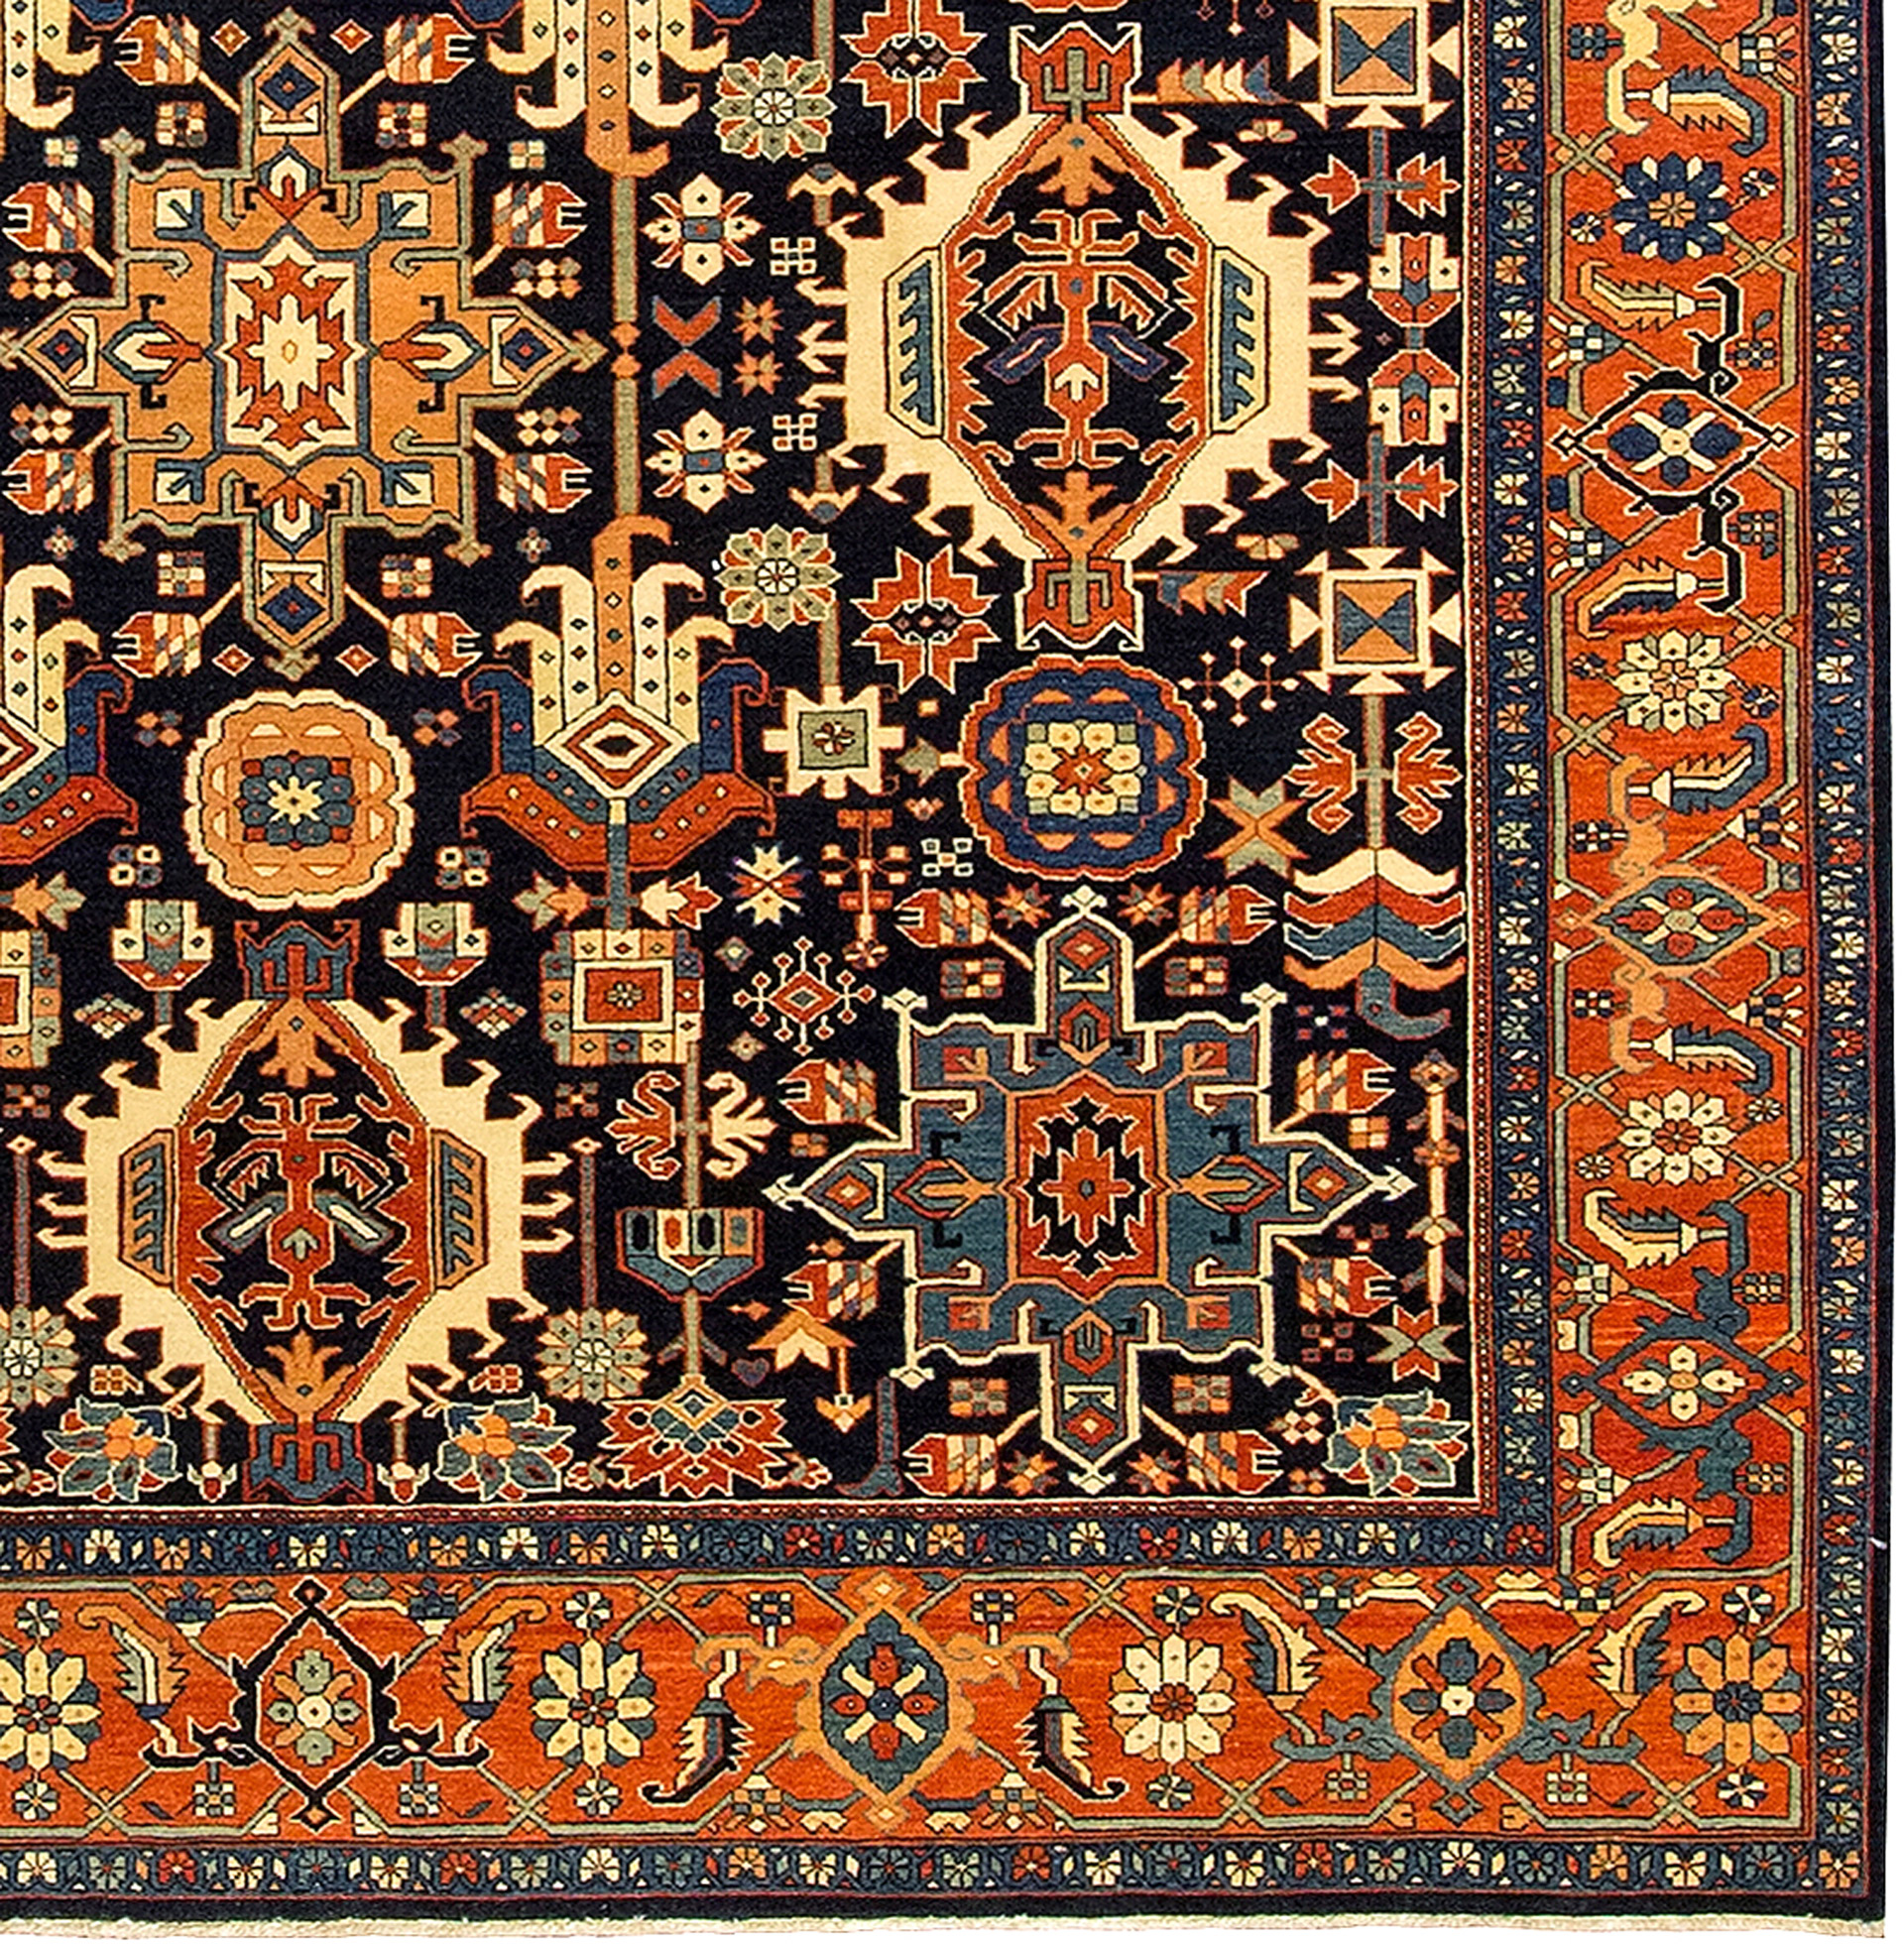 Detail of a new, hand woven Turkish carpet with a Persian Karaja design of medallions on a navy blue field - Douglas Stock Gallery, South Natick,MA, Boston area Oriental rugs and Persian carpets - Oriental rugs New England